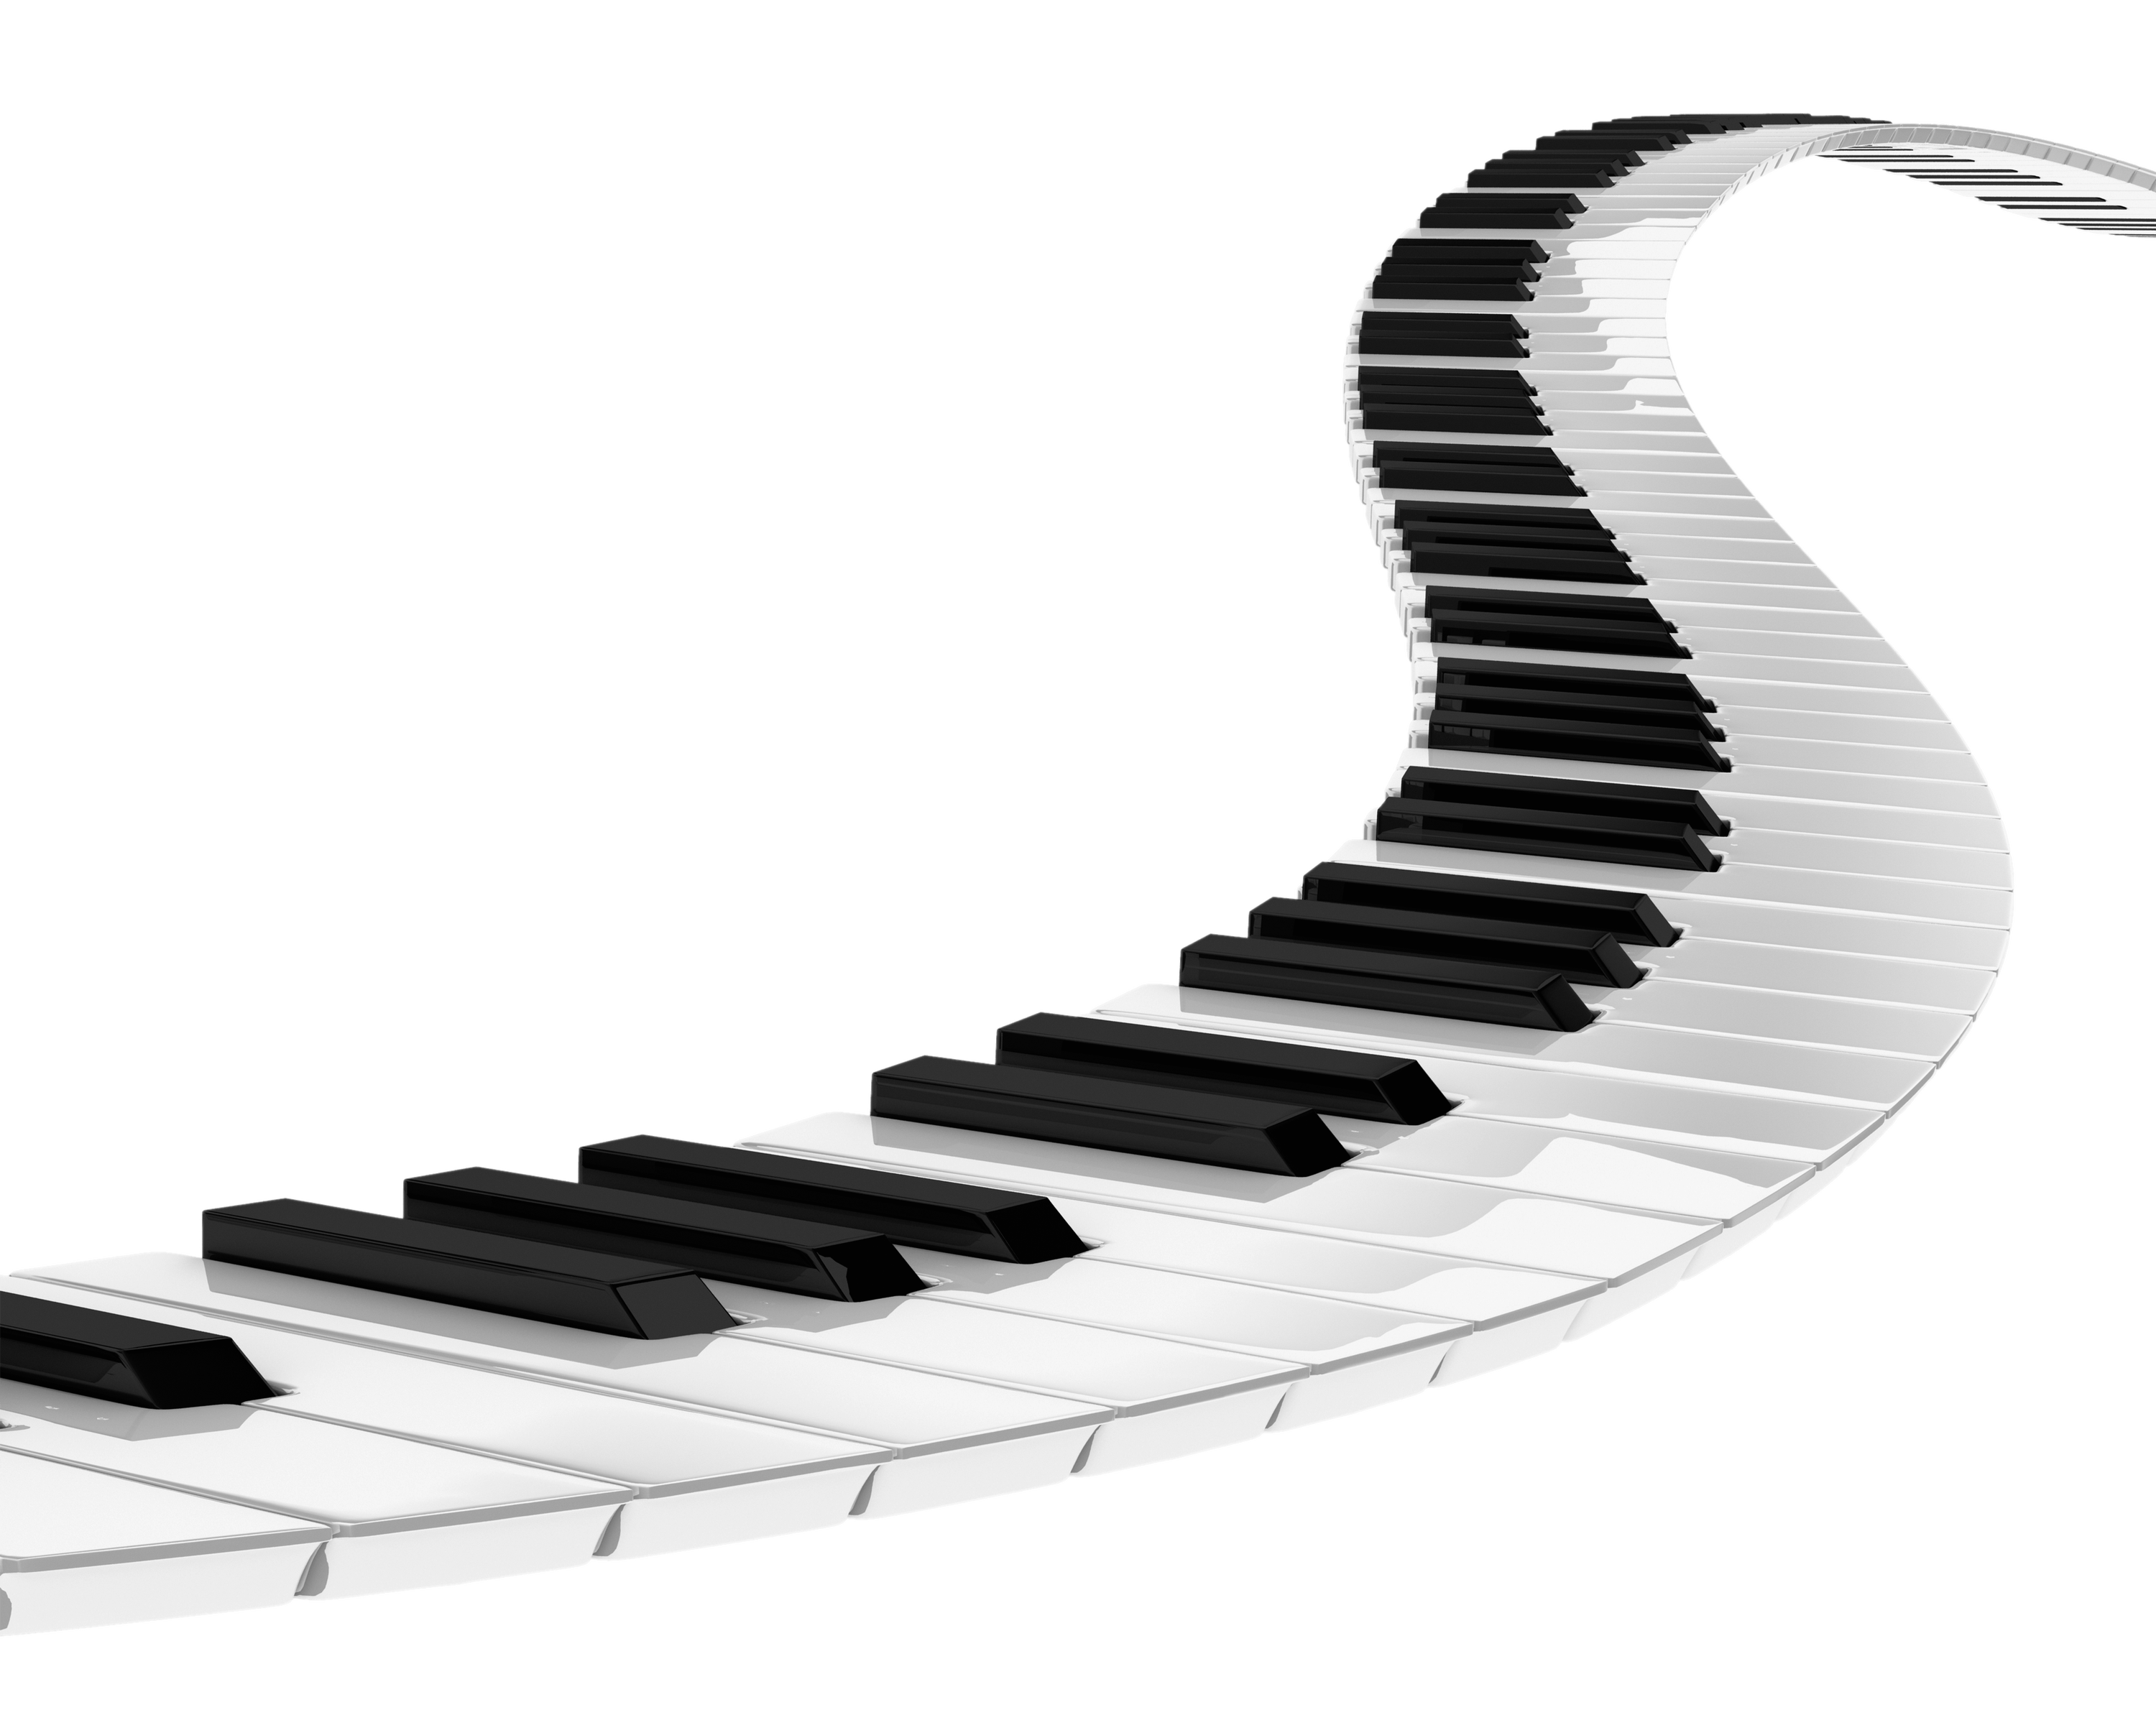 Clipart piano harpsichord. Spiral transparent png stickpng